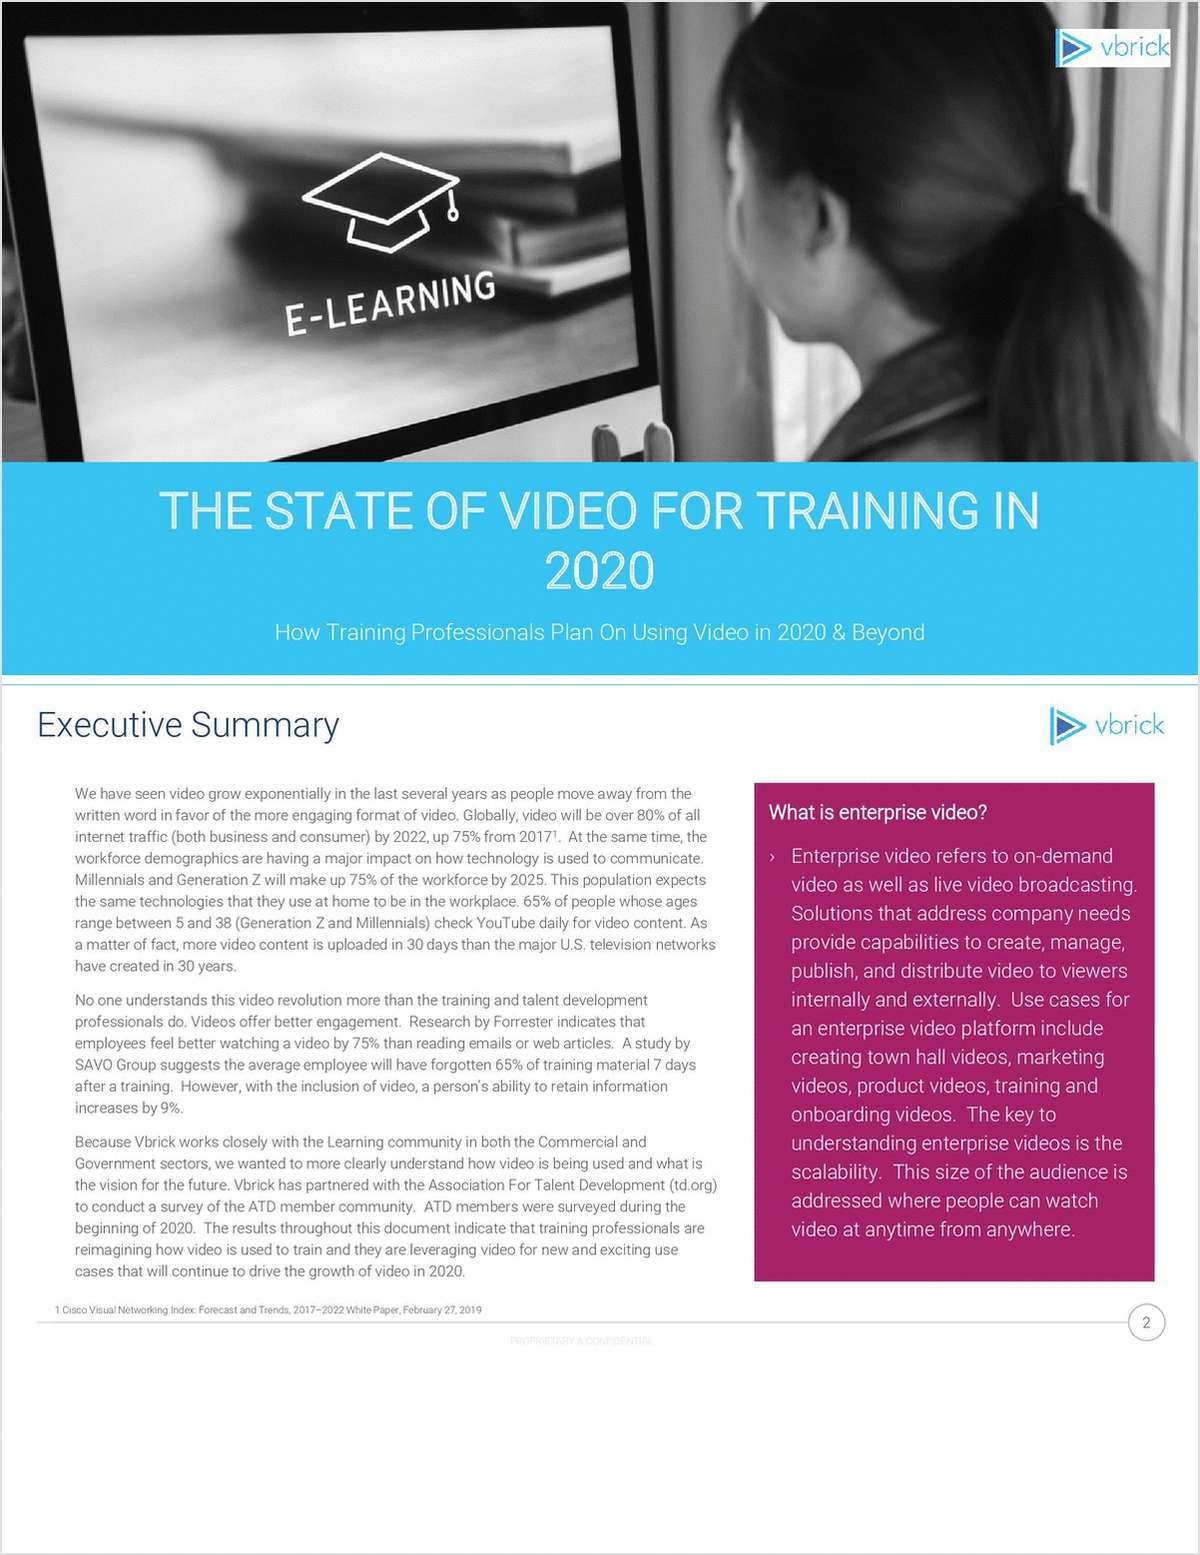 THE STATE OF VIDEO FOR TRAINING IN 2020